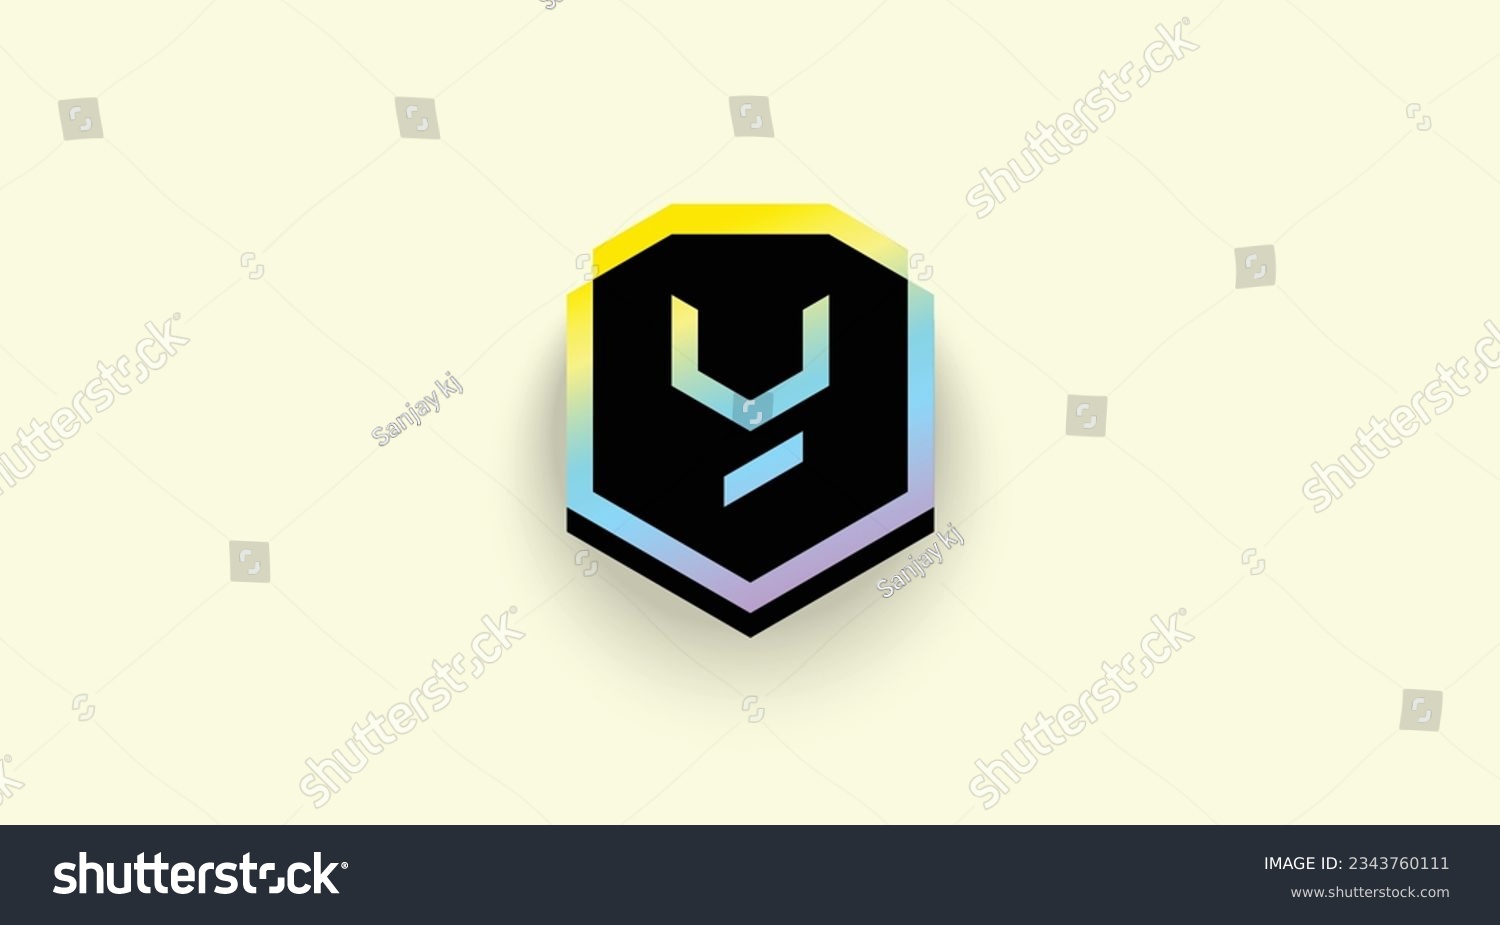 SVG of Yield Guild Games, YGG cryptocurrency logo on isolated background with copy space. 3d vector illustration of Yield Guild Games, YGG Token icon banner design concept. svg